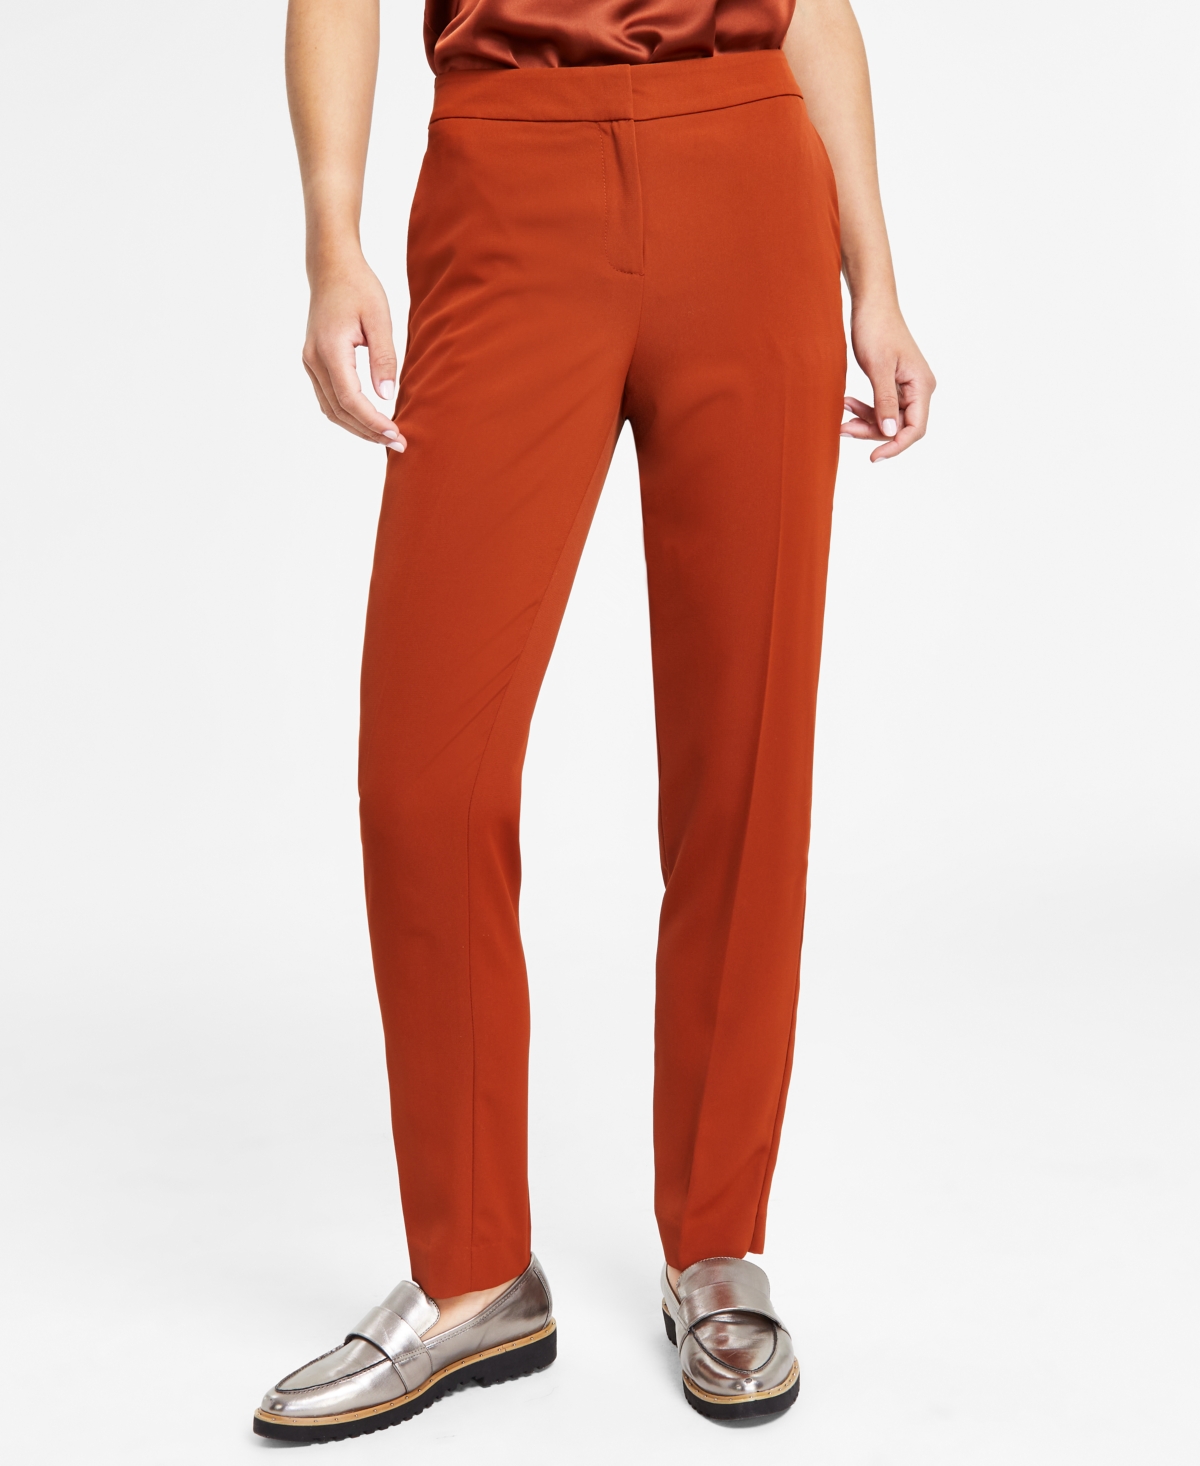 Bar Iii Women's Mid-Rise Fly-Front Straight-Leg Pants, Created for Macy's